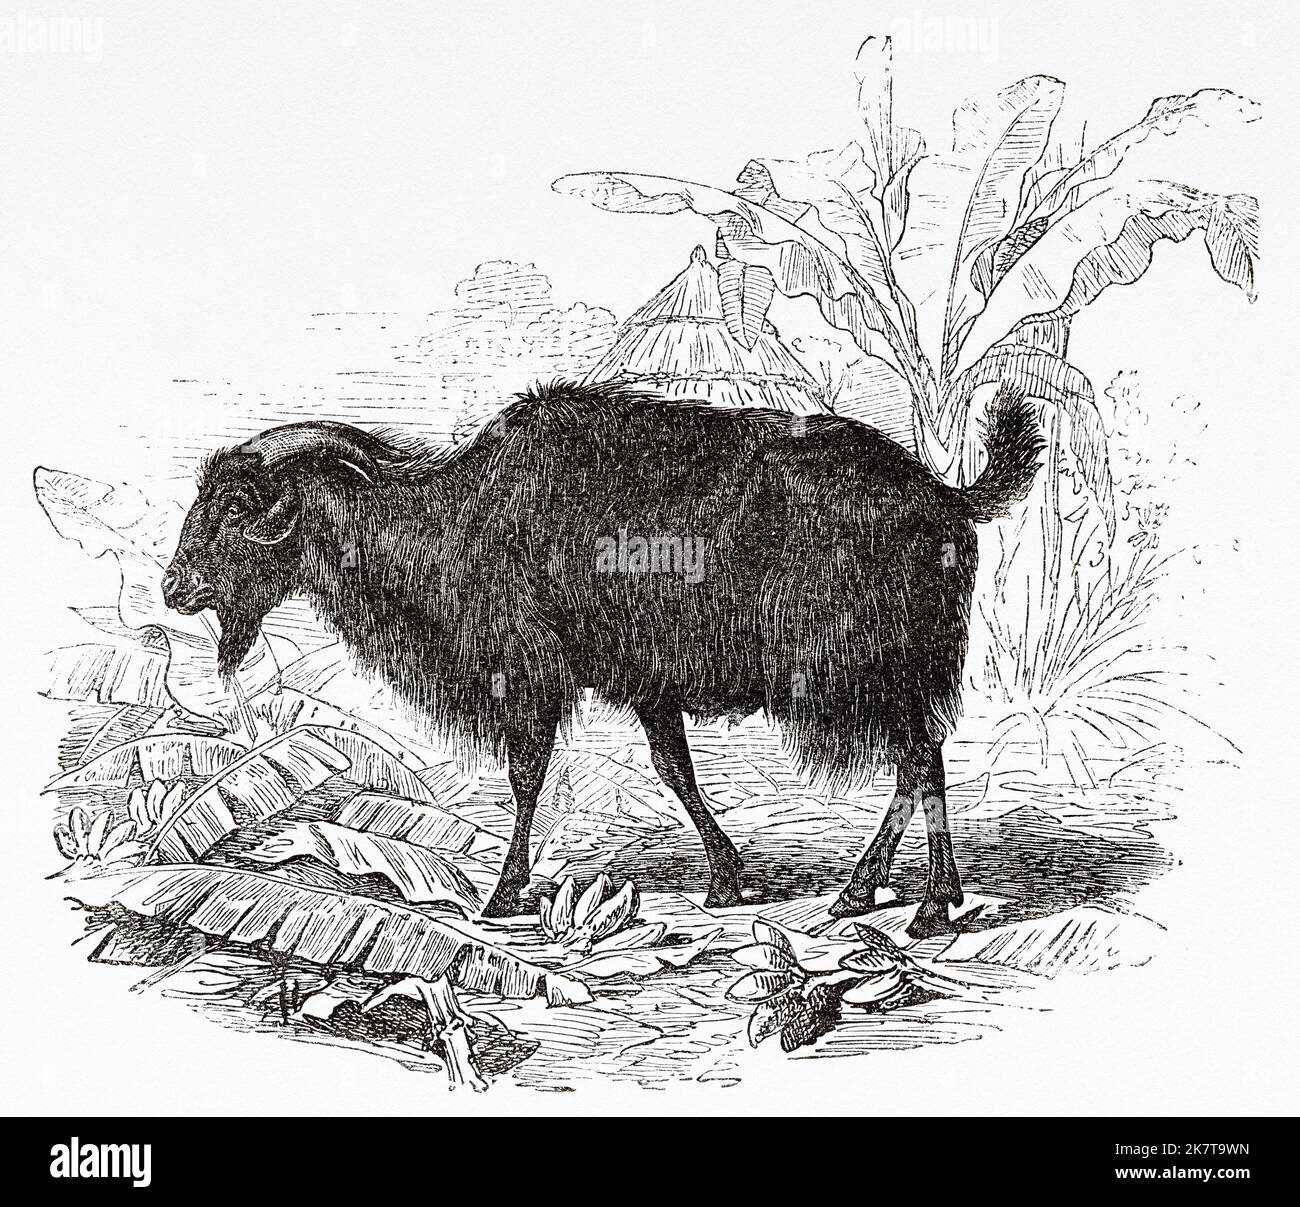 A goat of Mombuttu people, Democratic Republic of the Congo. Africa. Heart of Africa Three years travels and adventures in the unexplored regions of Central Africa by Georg August Schweinfurth, 1868-1871 Stock Photo